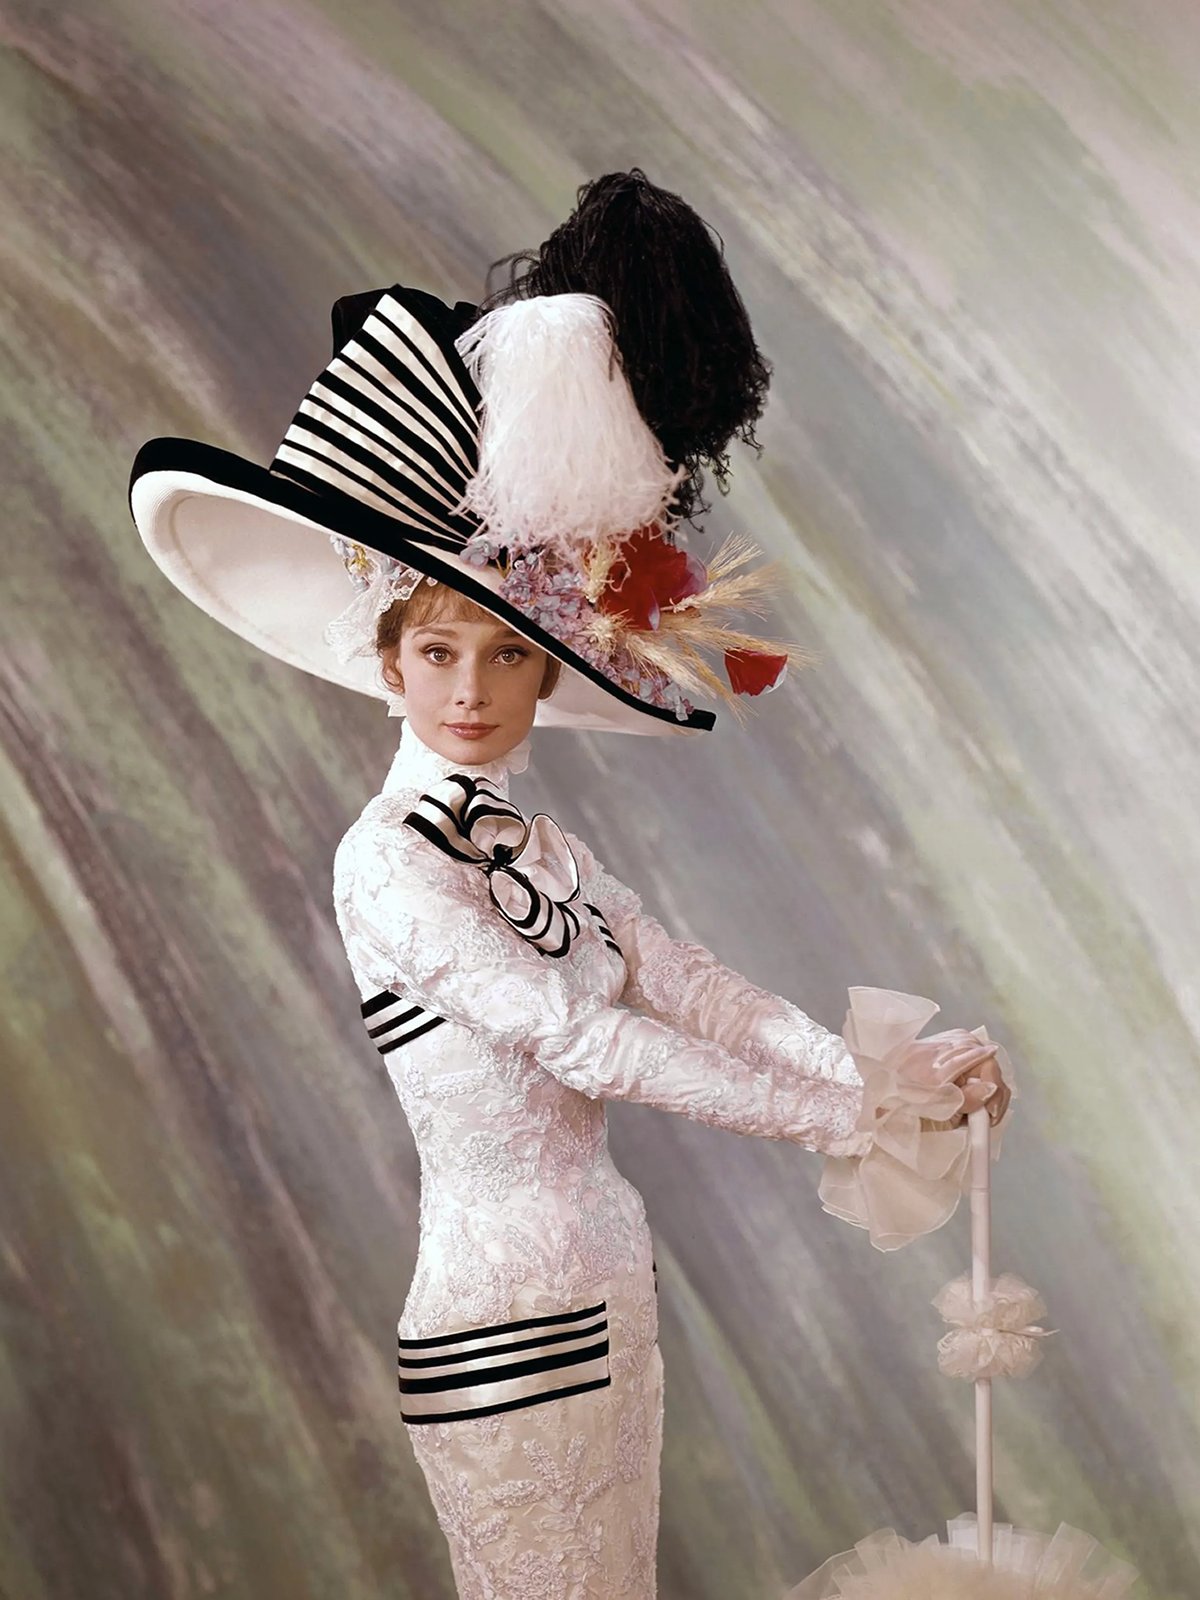 Audrey Hepburn in My Fair Lady, style icon